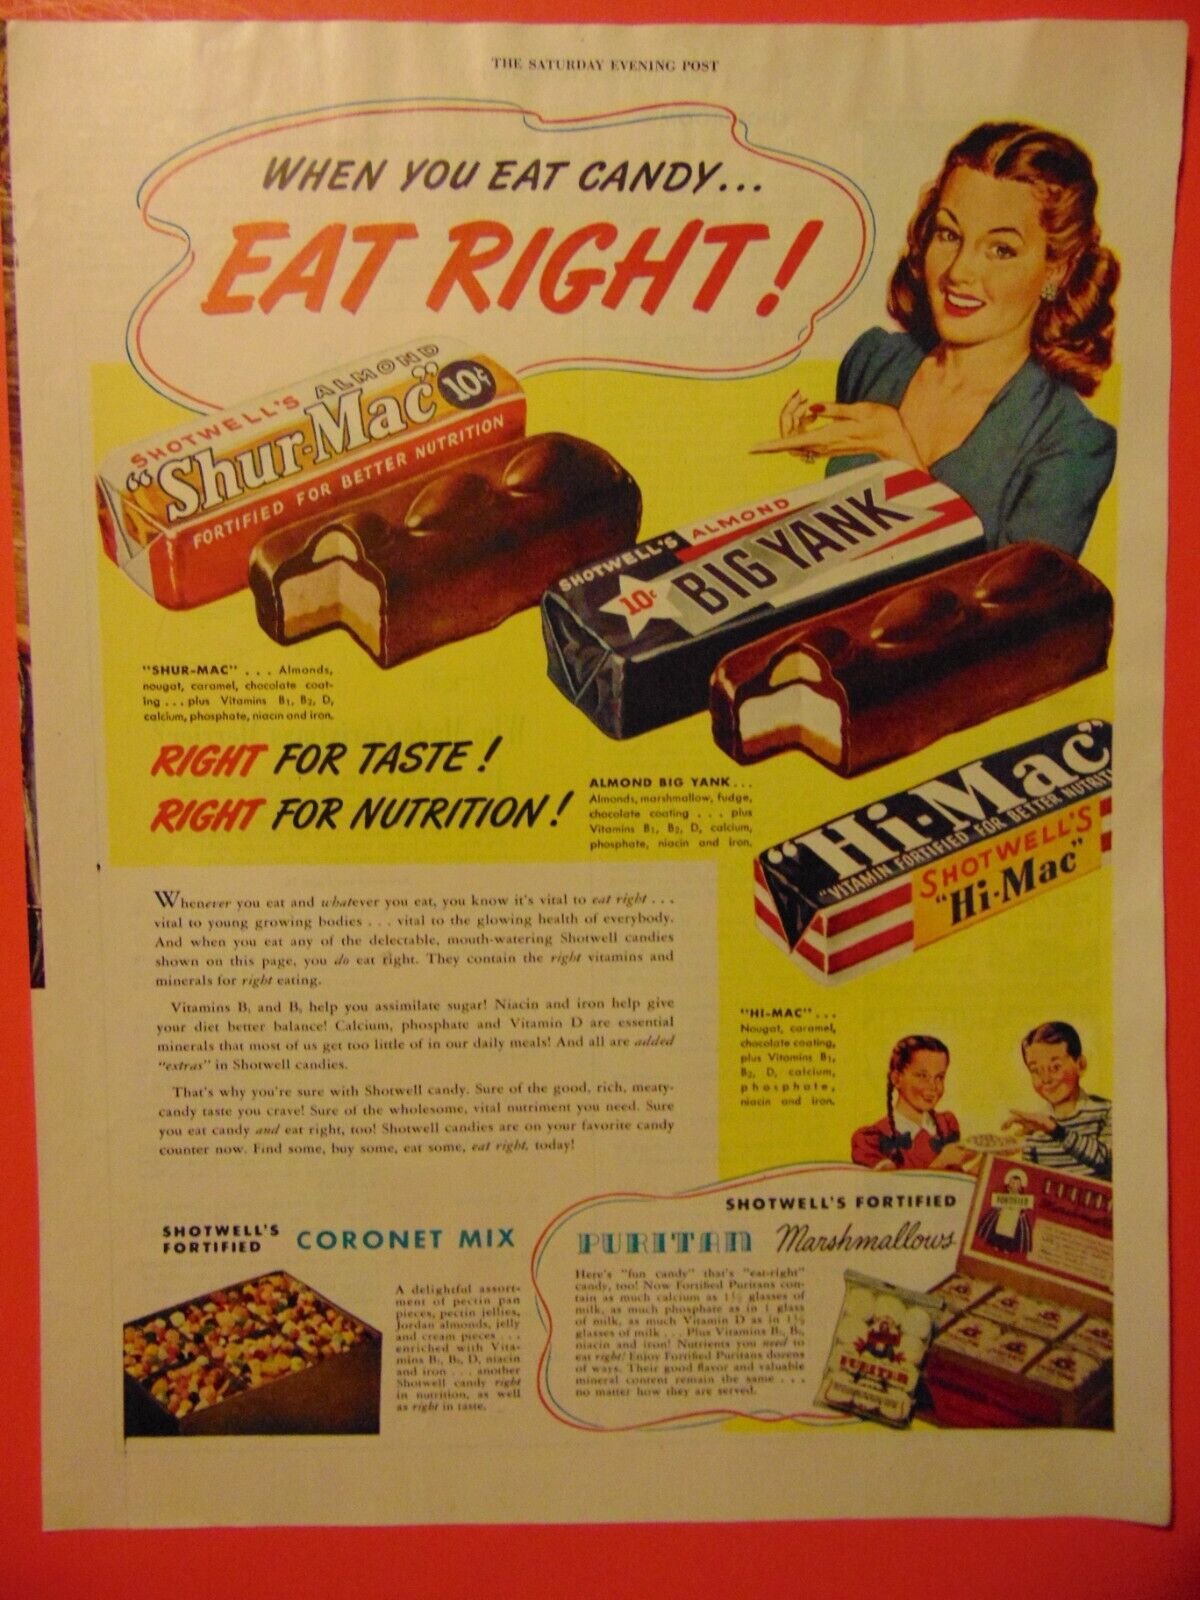 1946 SHOTWELL\'S Candy Bars EAT RIGHT photo art print ad